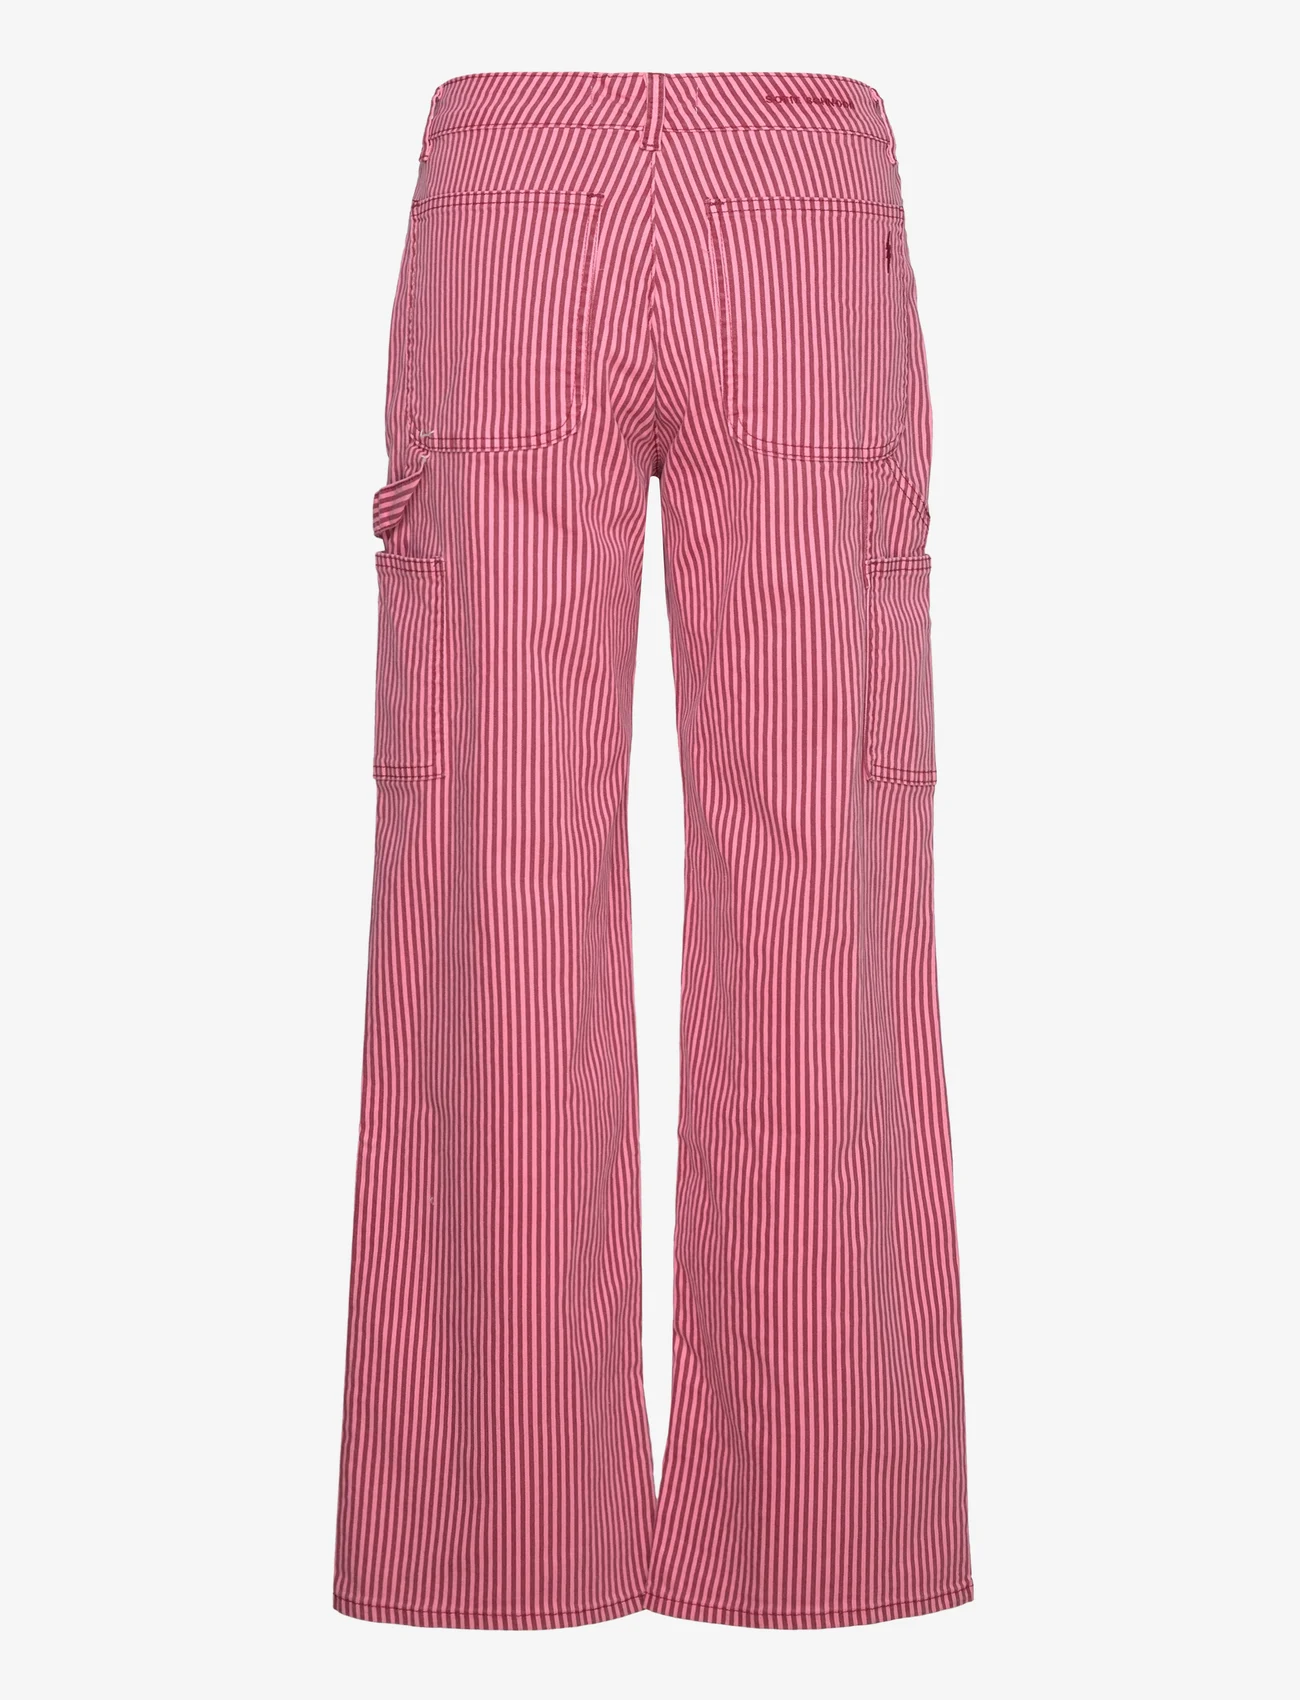 Sofie Schnoor - Trousers - pantalon cargo - red striped - 1